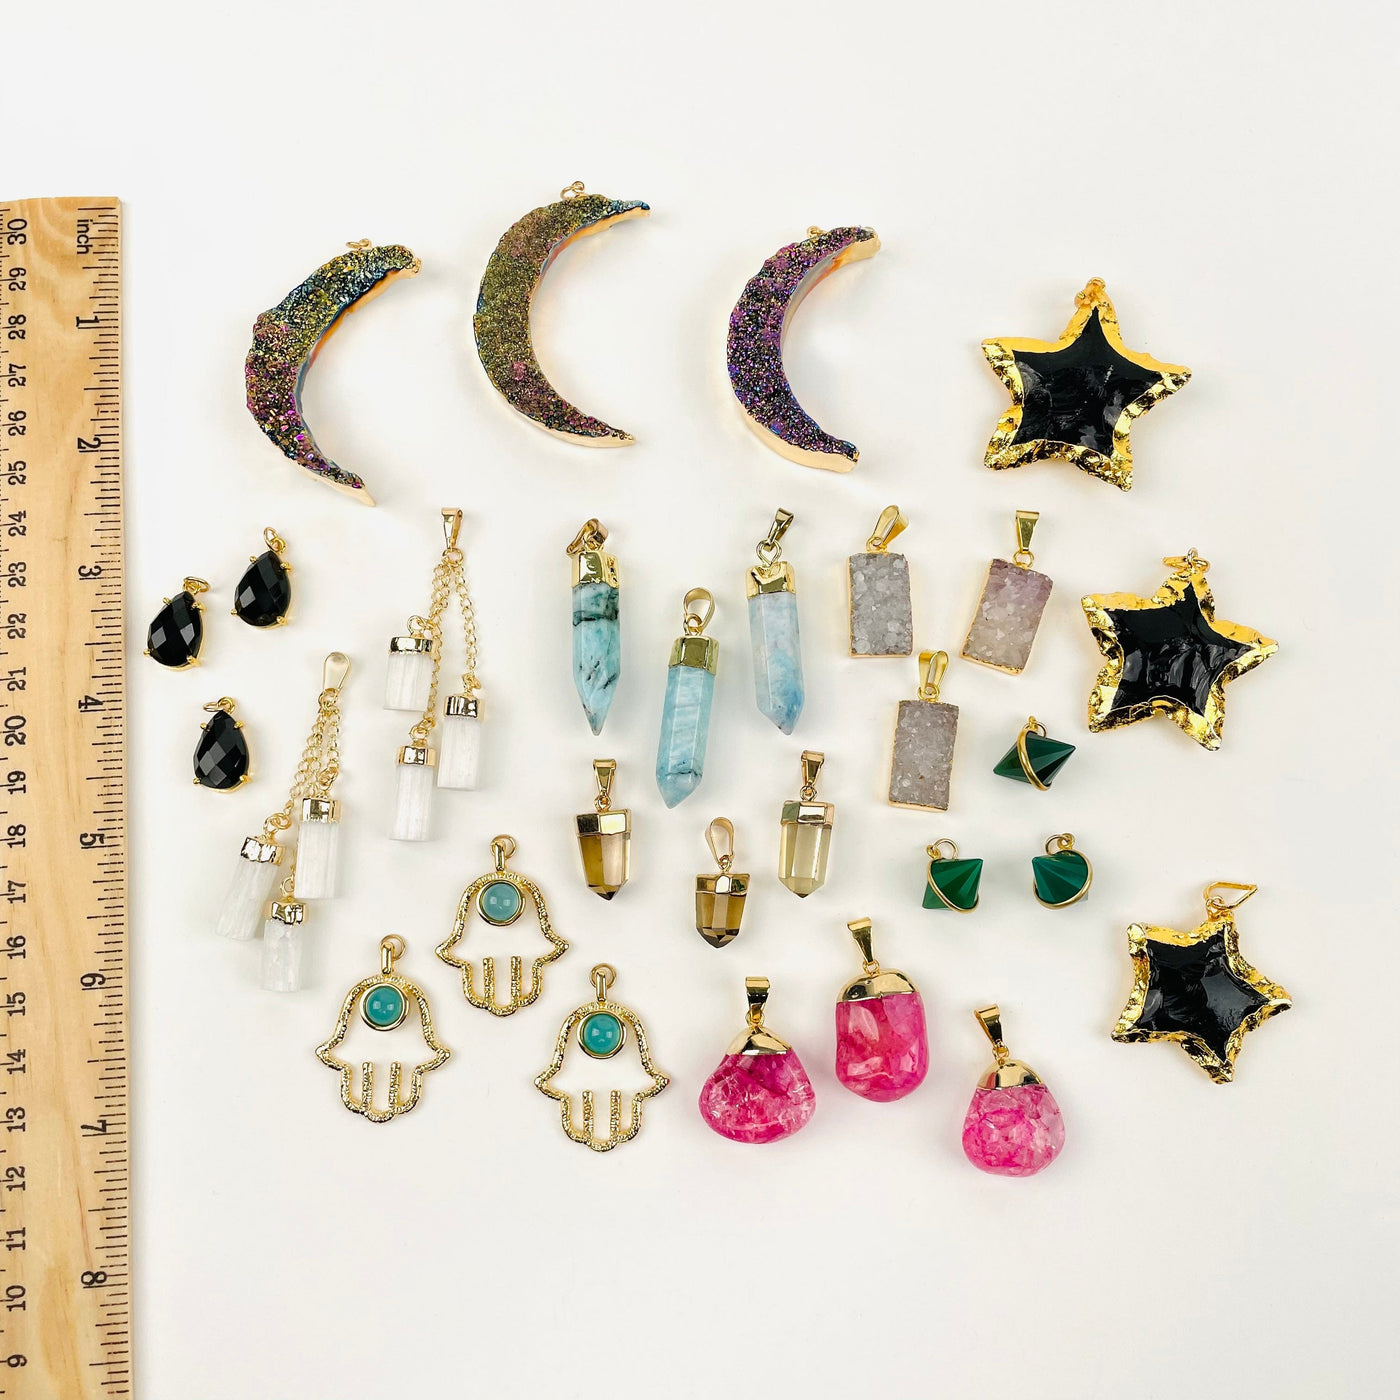 pendants displayed next to a ruler for size reference 